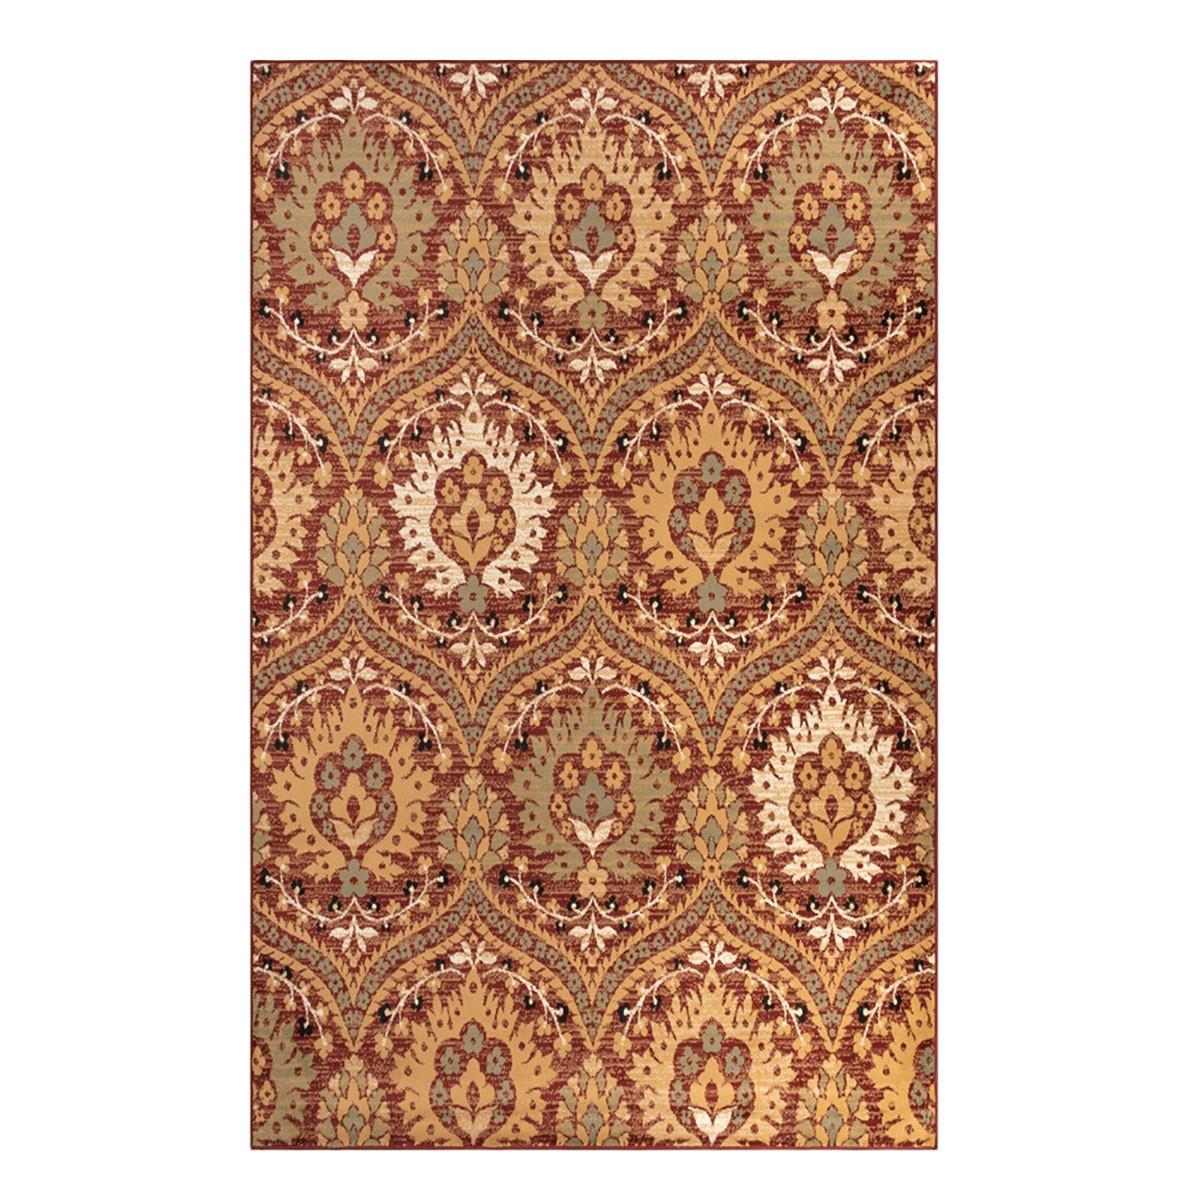 8' X 10' Red Olive And Gold Floral Stain Resistant Area Rug Default Title